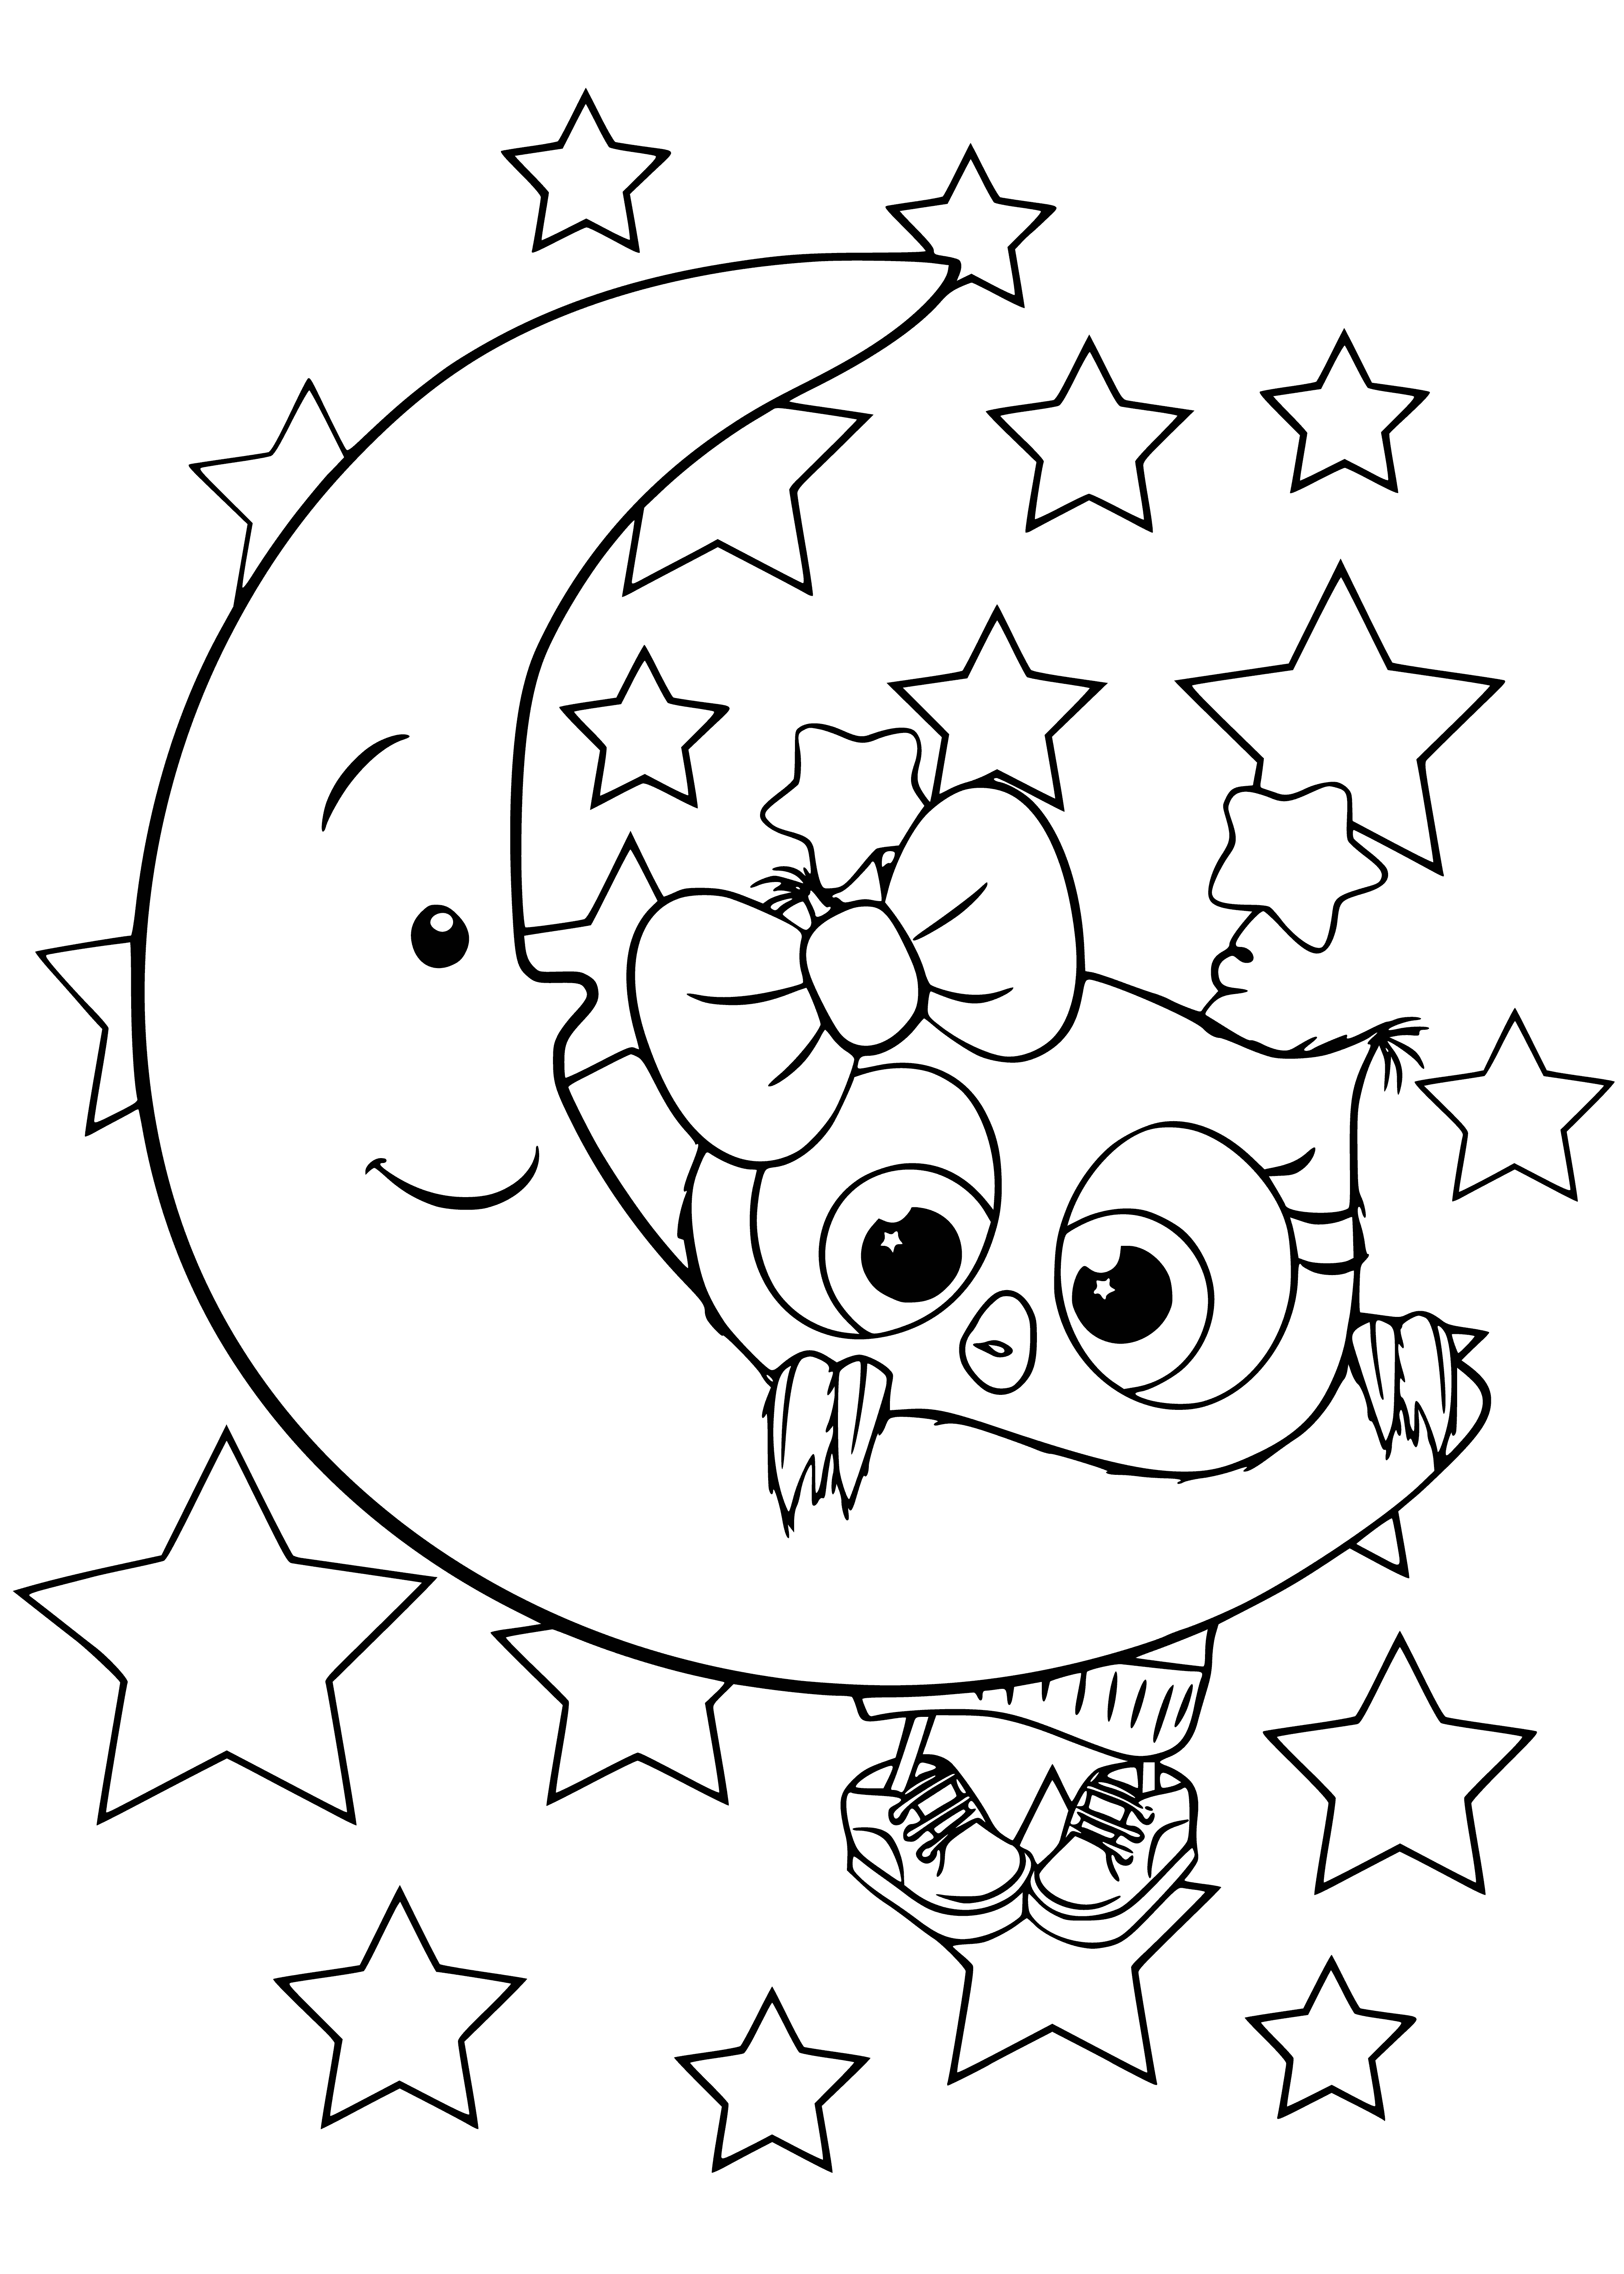 coloring page: Adorable owlet perched atop a branch, bright eyes, soft brown feathers, leafy green plant, small flowers blooming on tranquil blue background. #Kawaii #CuteColoring